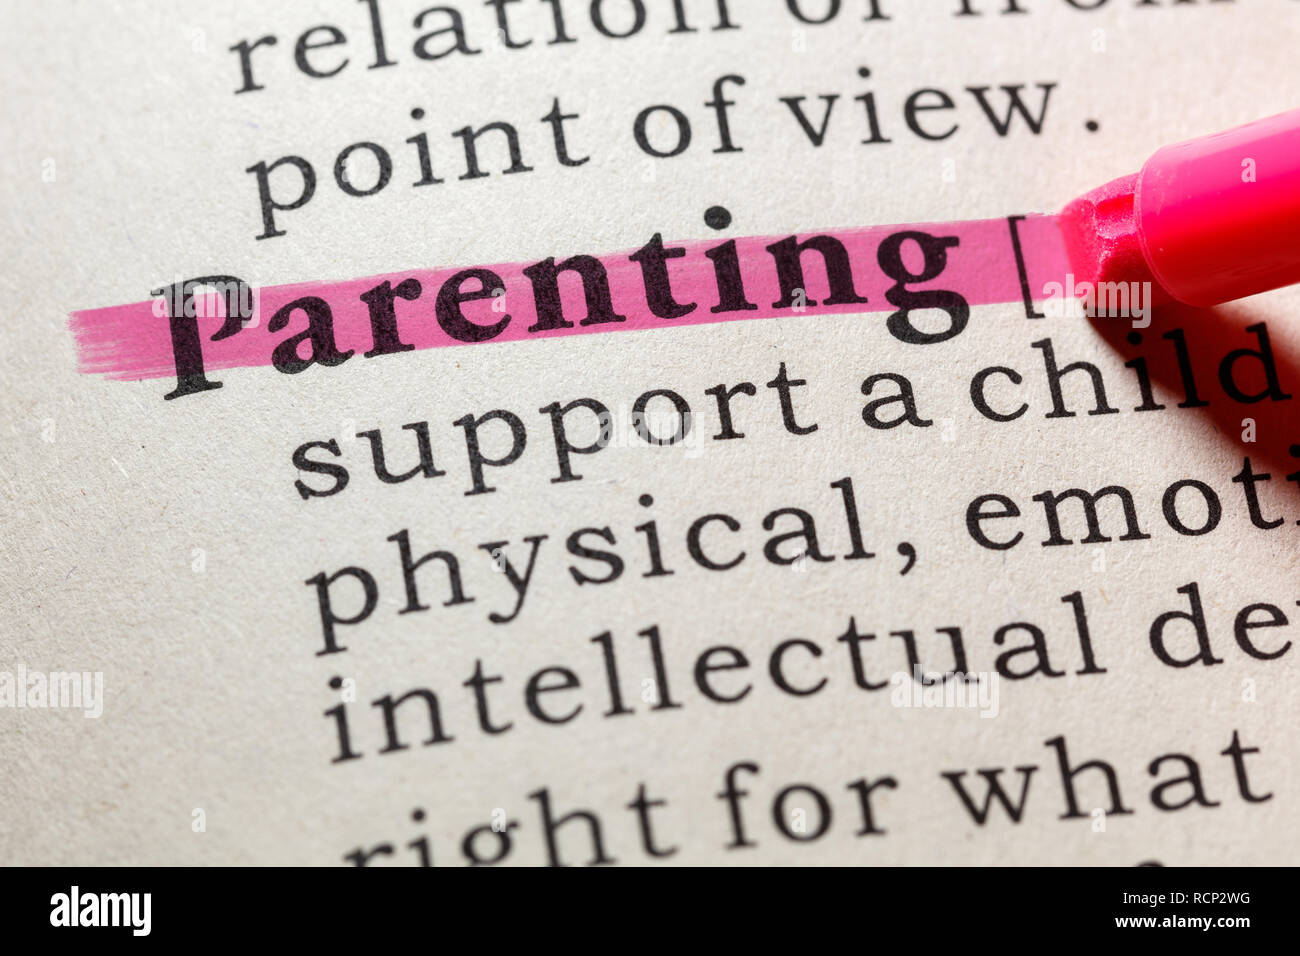 Fake Dictionary, Dictionary definition of the word Parenting. including key descriptive words. Stock Photo